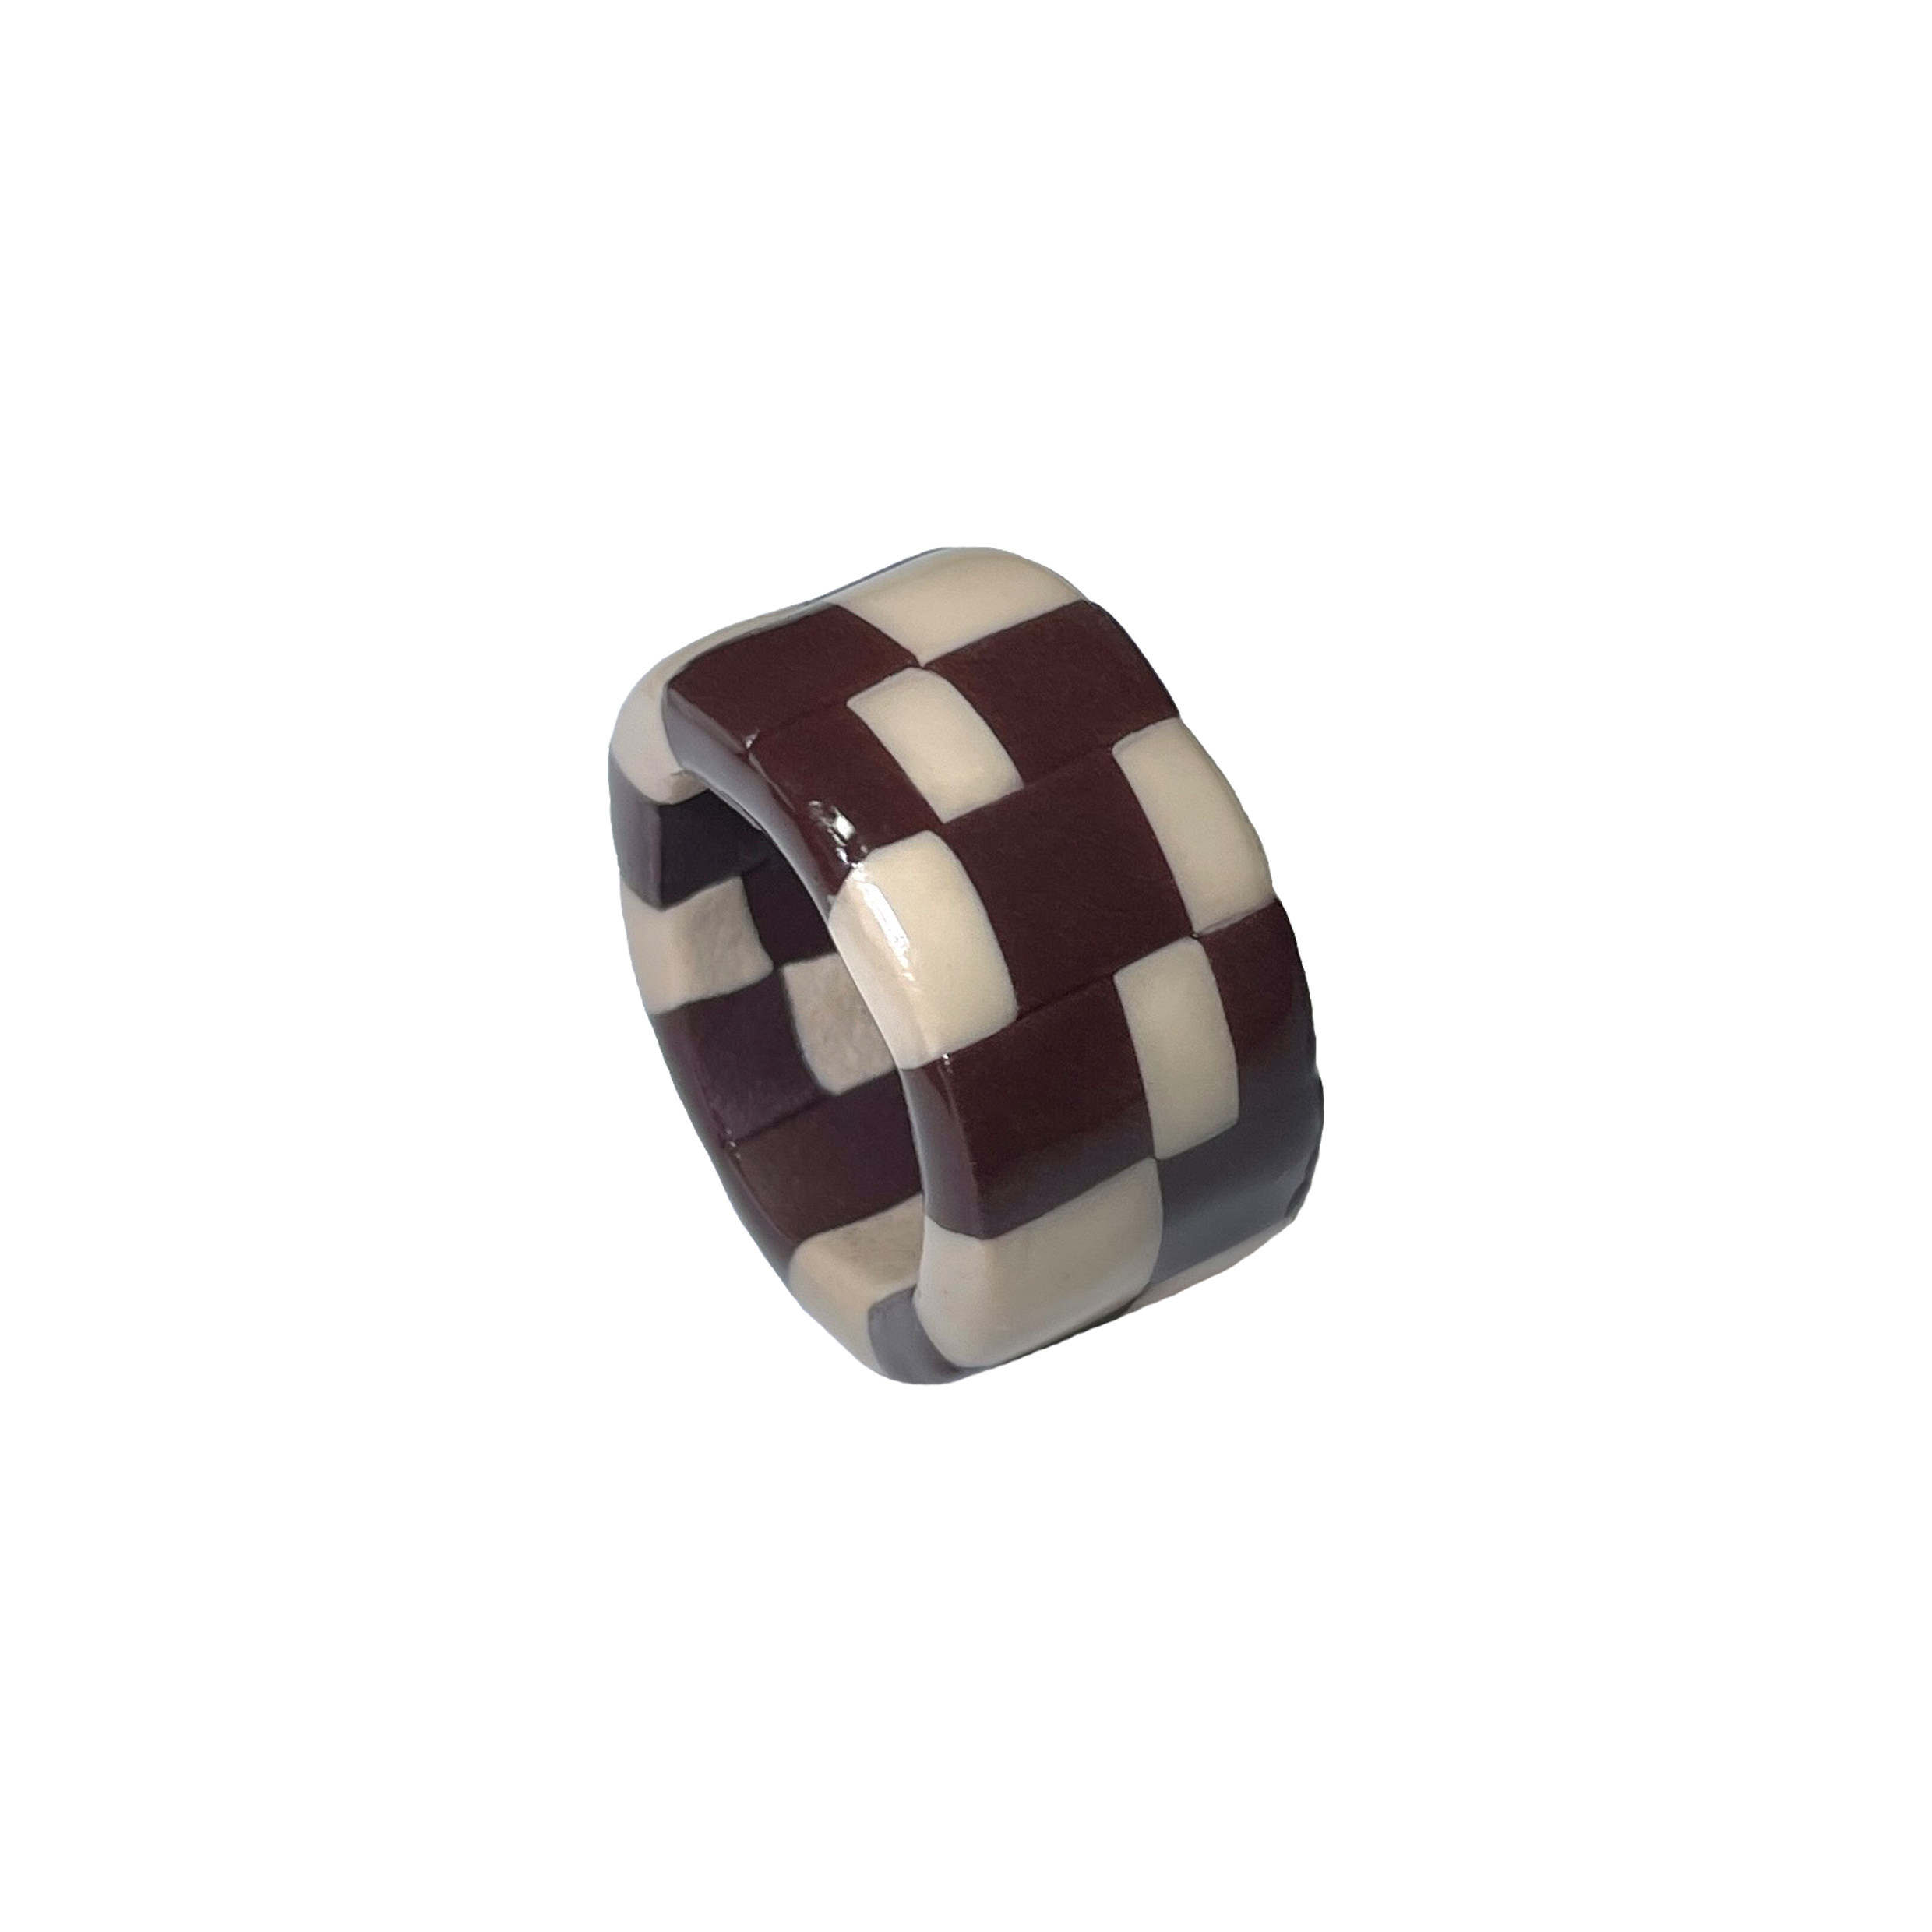 Chocolate Latte Check Ring